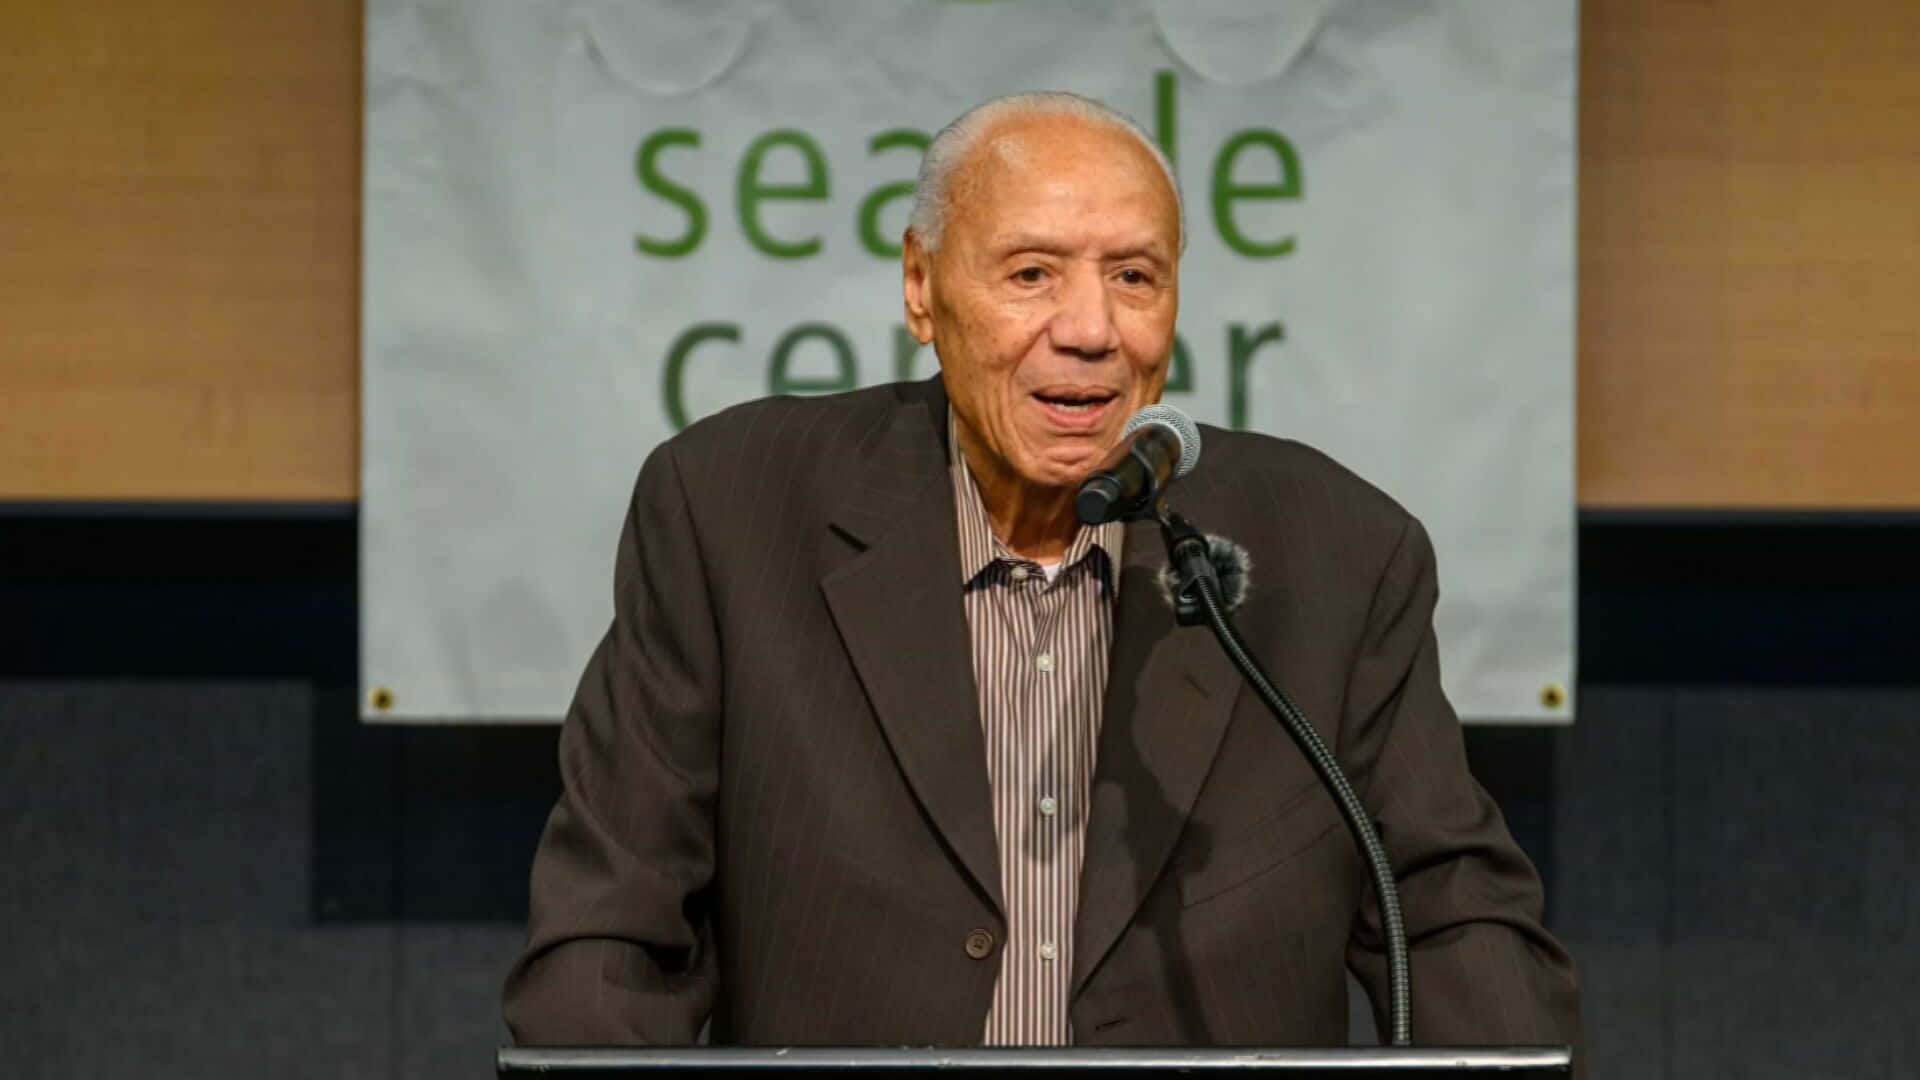 Lenny Wilkens At The Seattle Center Wallpaper